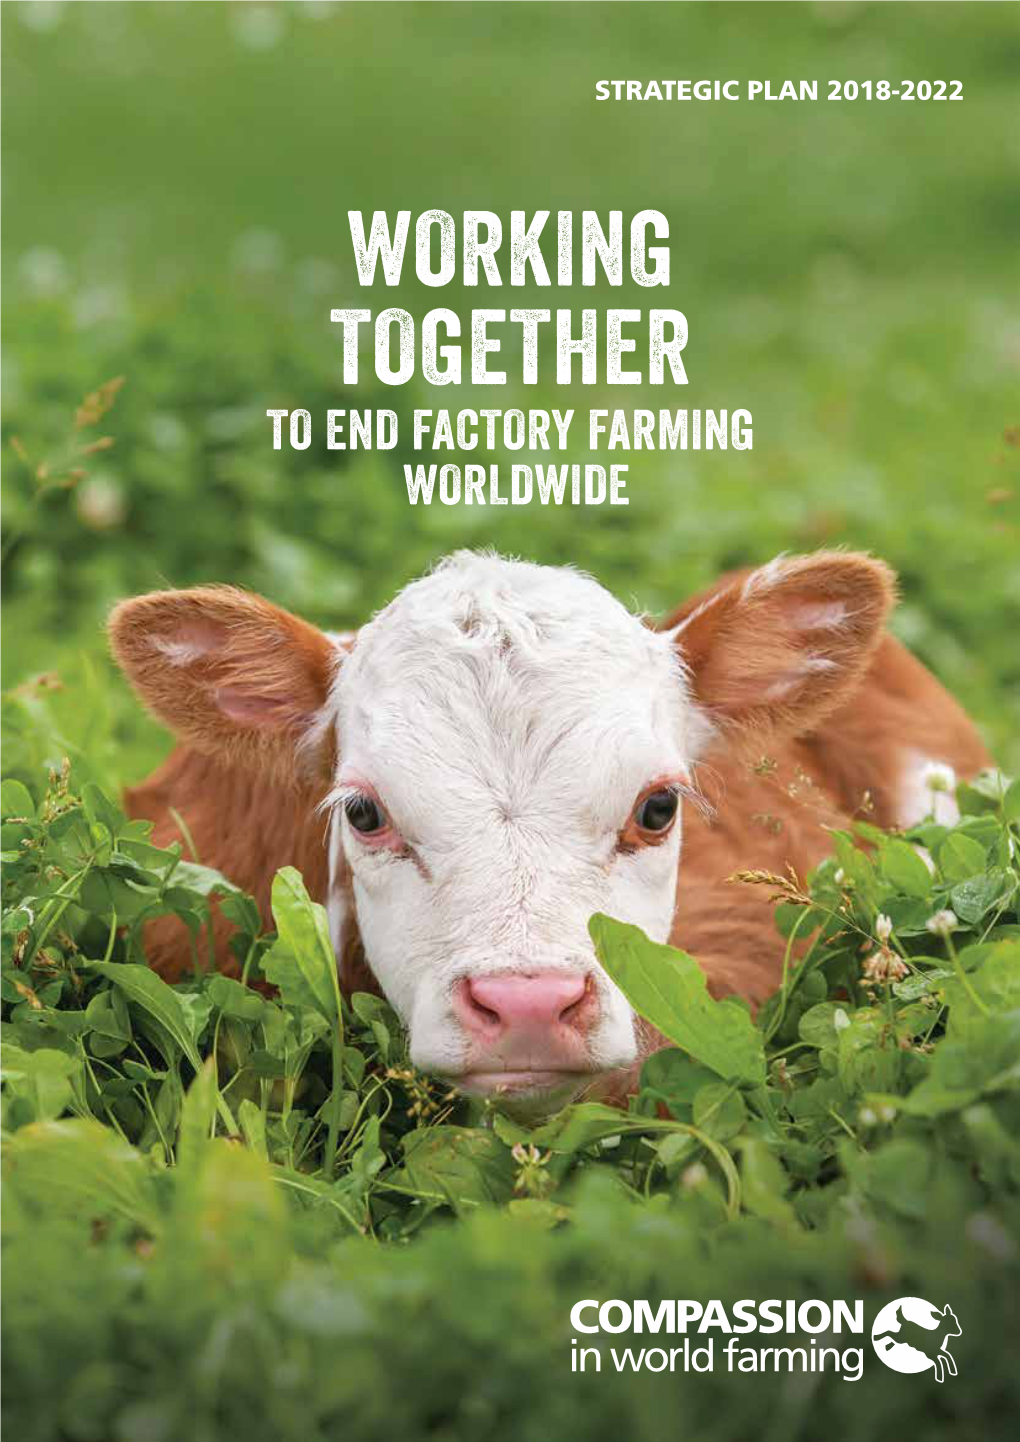 Strategic Plan 2018-2022 Working Together to End Factory Farming Worldwide